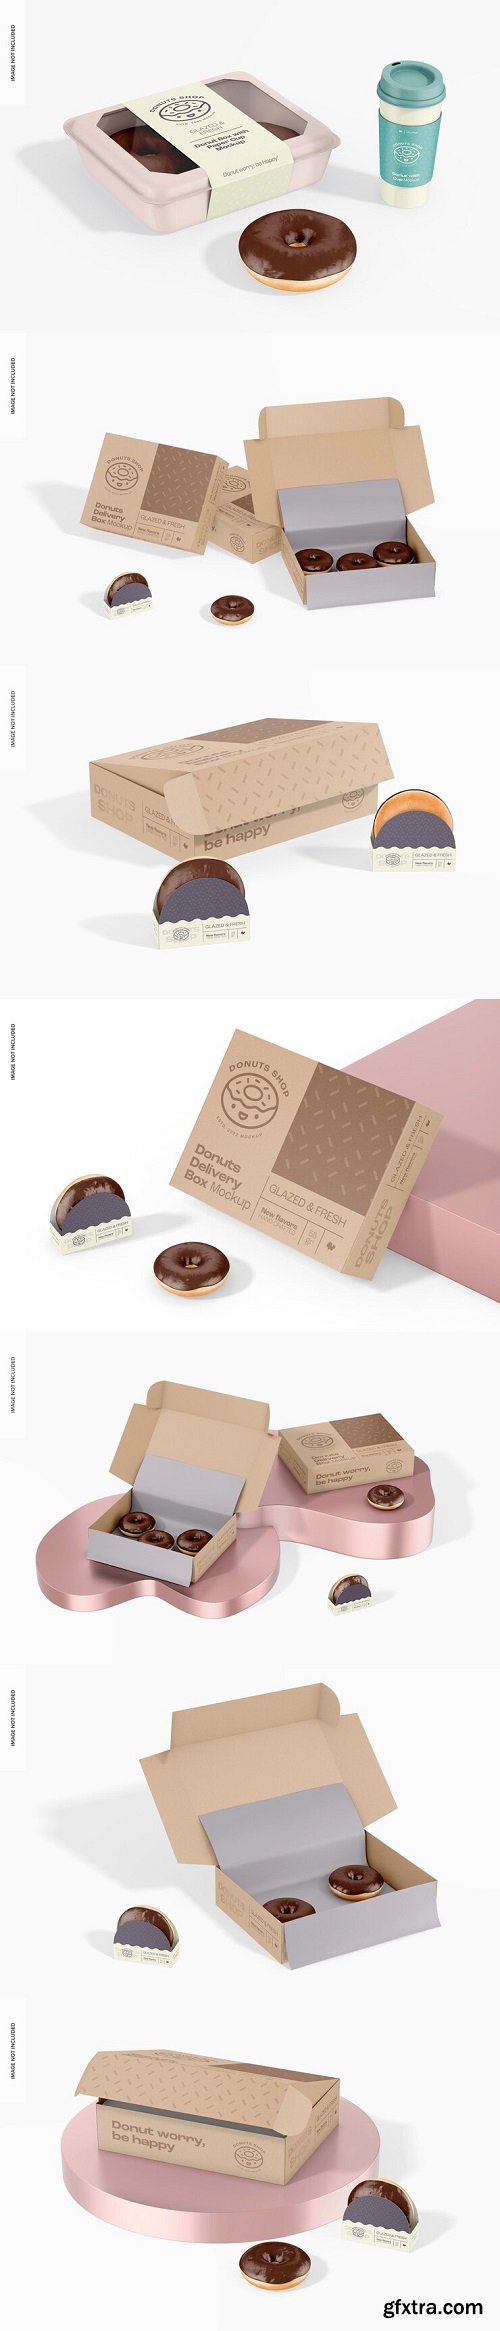 Donut box with paper cup mockup with donuts